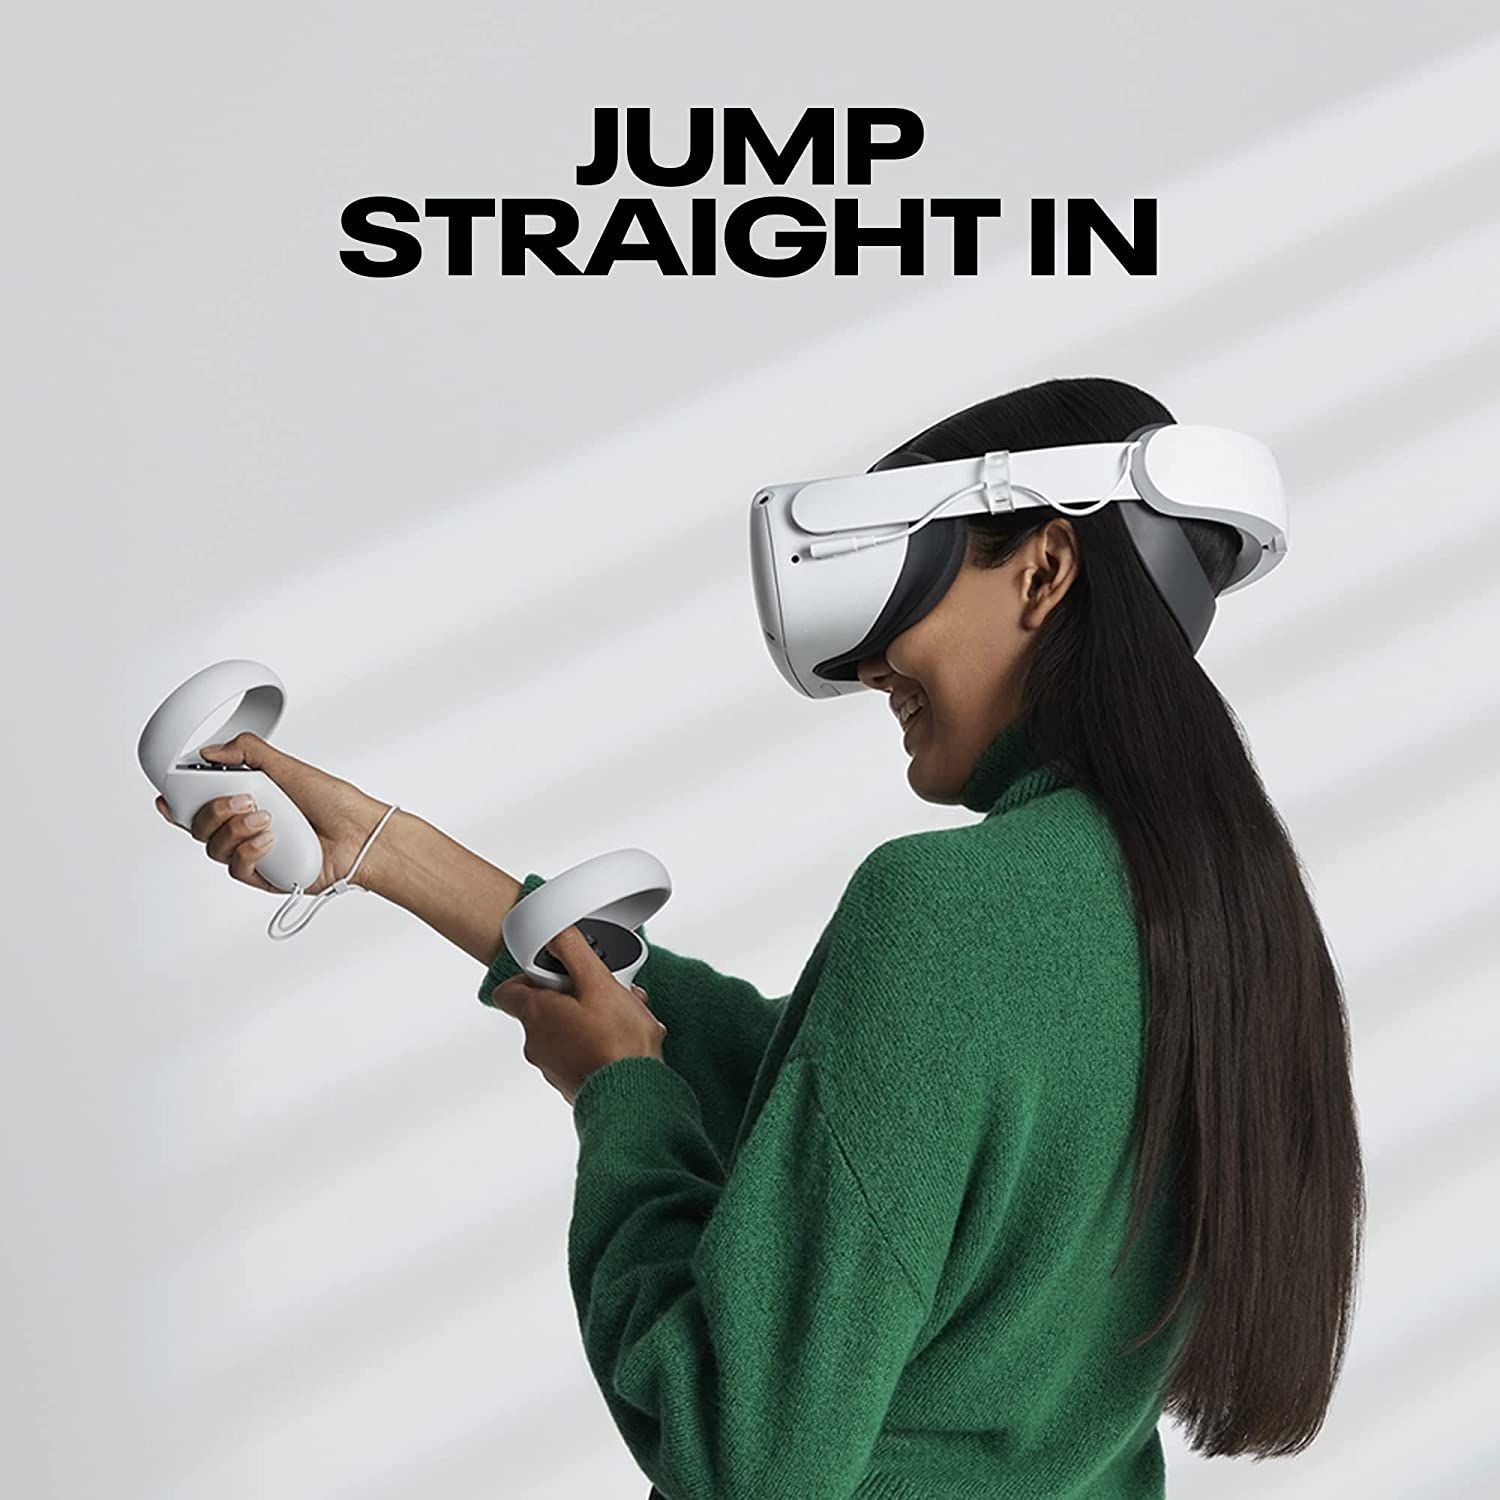 The Oculus Quest 2 is the greatest VR headset you can buy right now because of its affordability and rich immersion